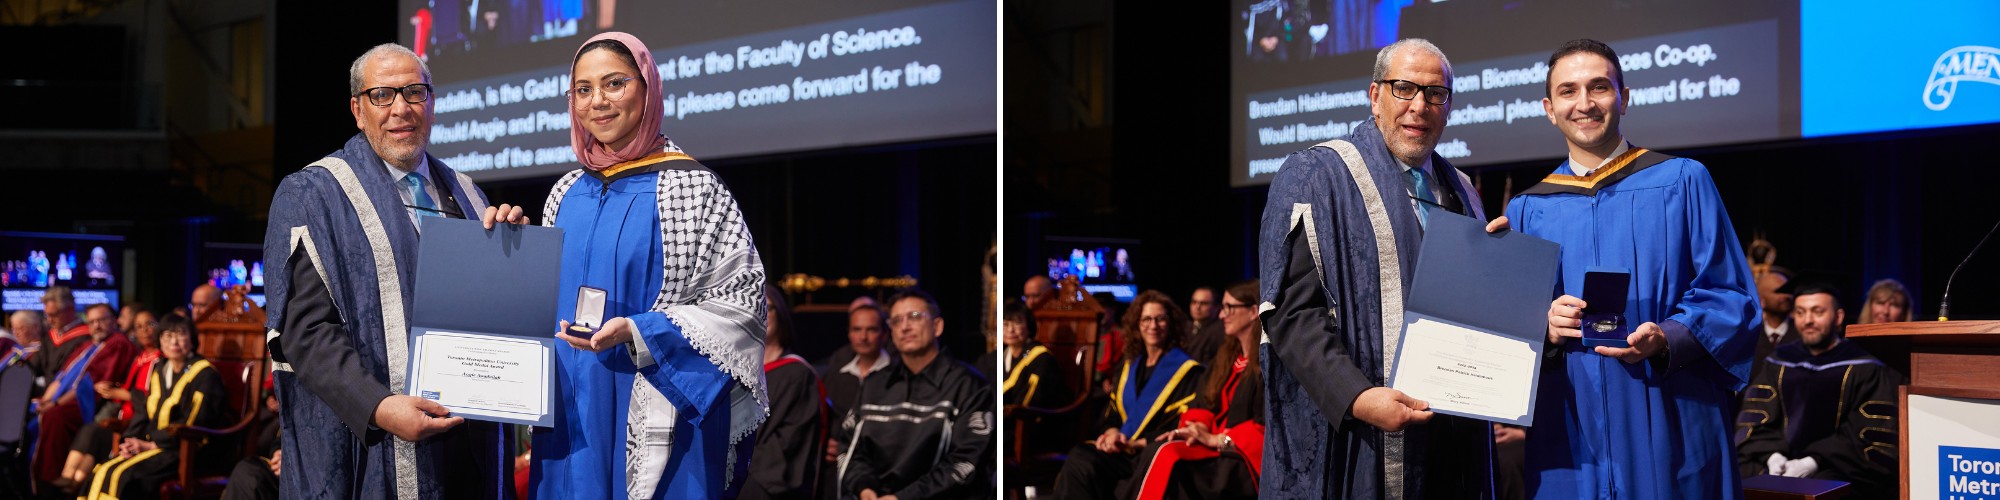 Two images of Faculty of Science award recipients standing beside President Lachemi at convocation